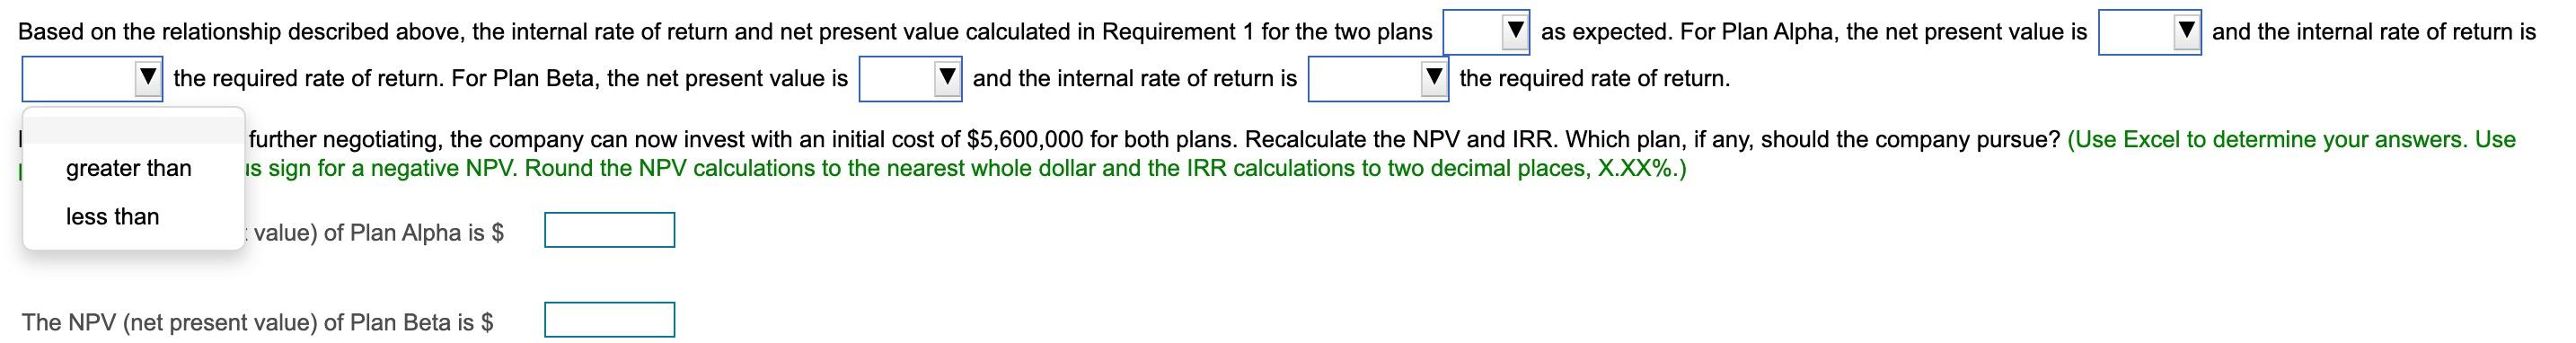 Based on the relationship described above, the internal rate of return and net present value calculated in Requirement 1 for